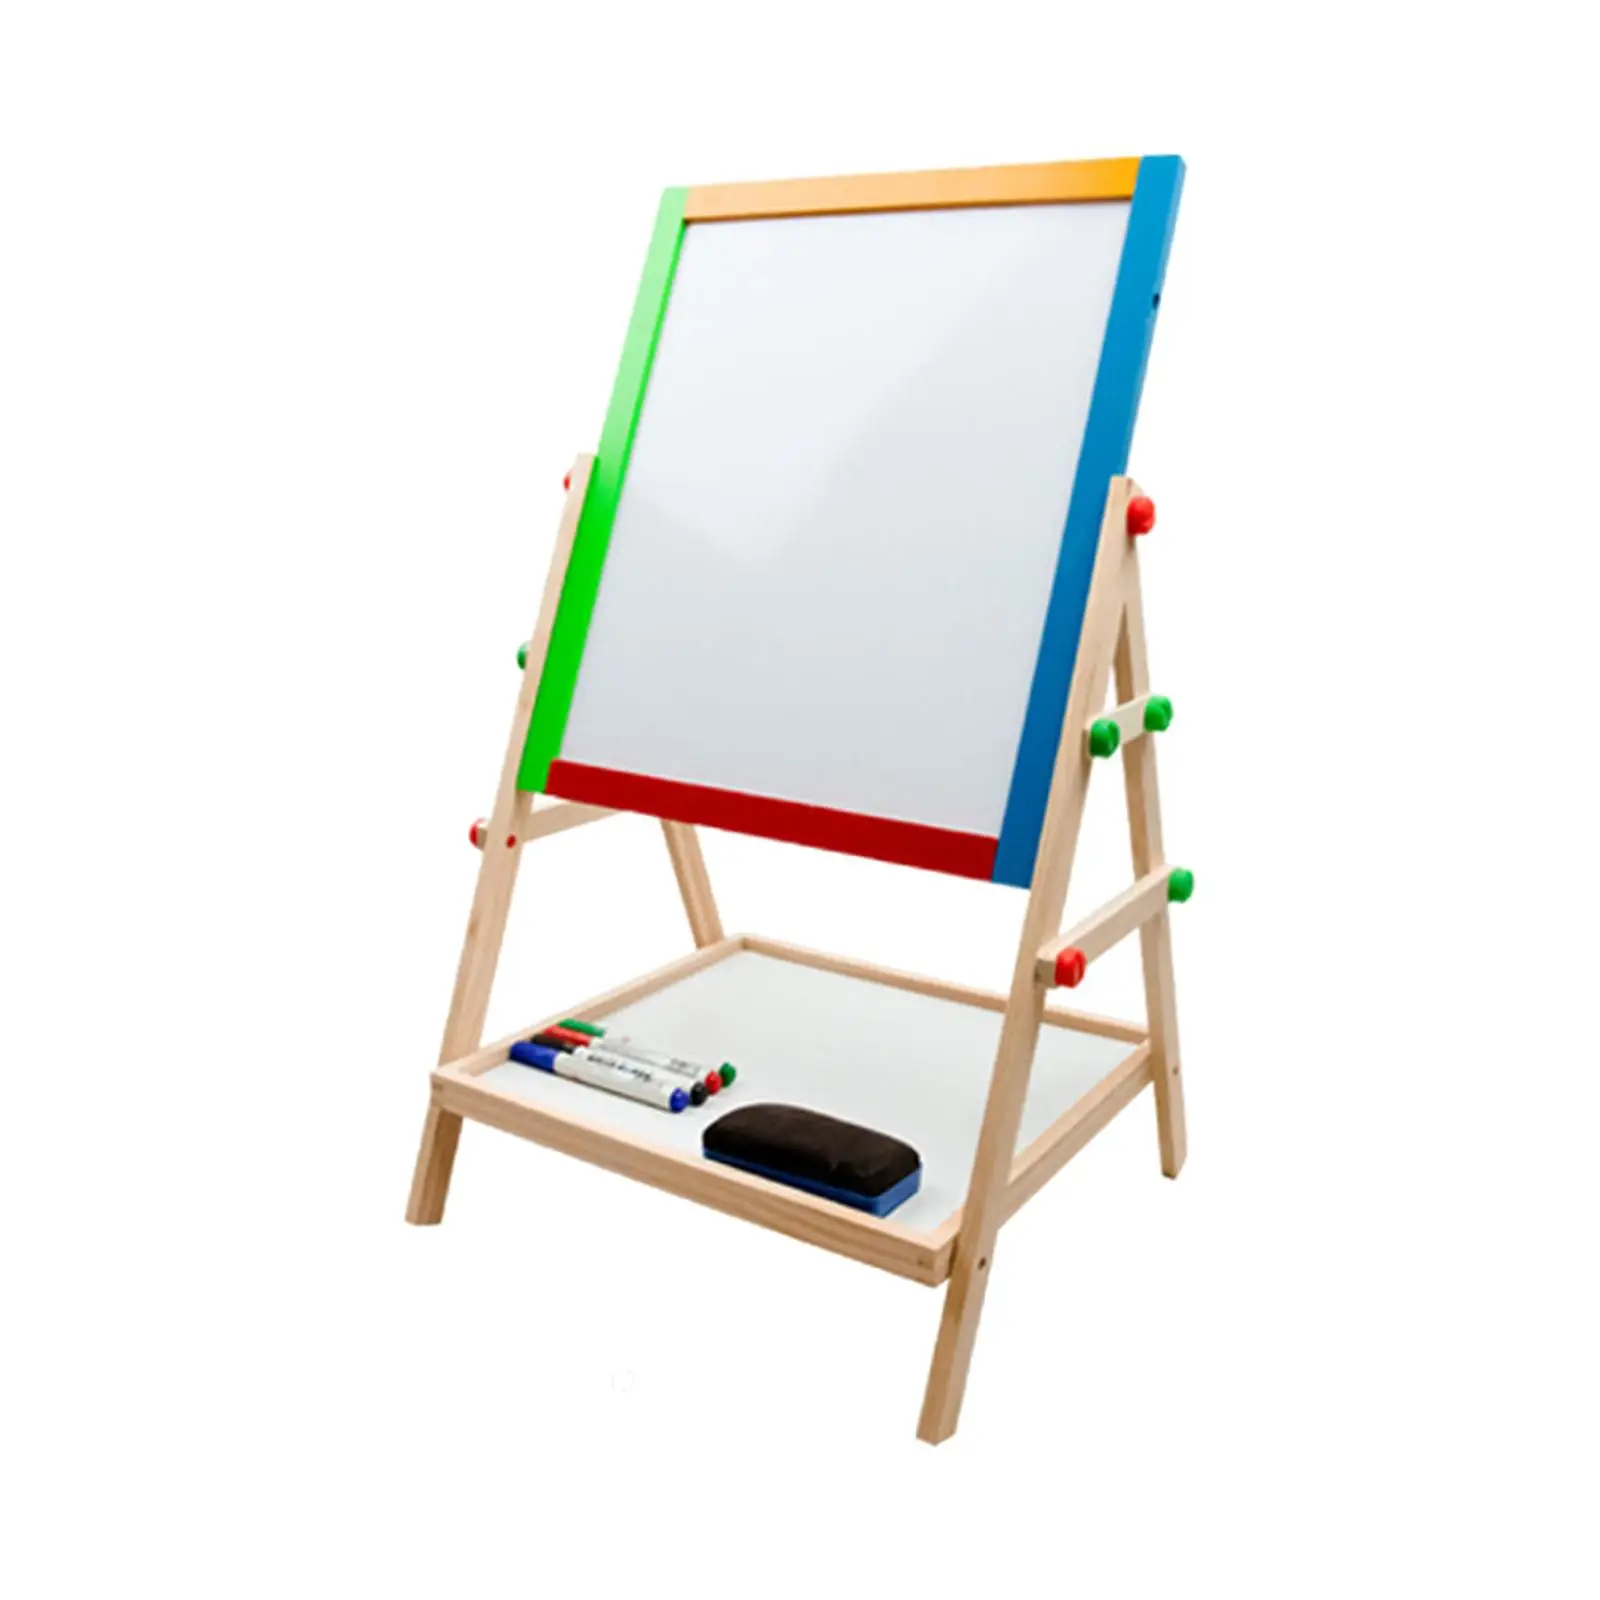 https://ae01.alicdn.com/kf/S384022707c7641bc9fc0303d4269bb9cQ/Kids-Art-Easel-Magnetic-Whiteboard-with-Painting-Supplies-Height-Adjust-Double-Sided-Artist-Easel-Educational-Learning.jpg